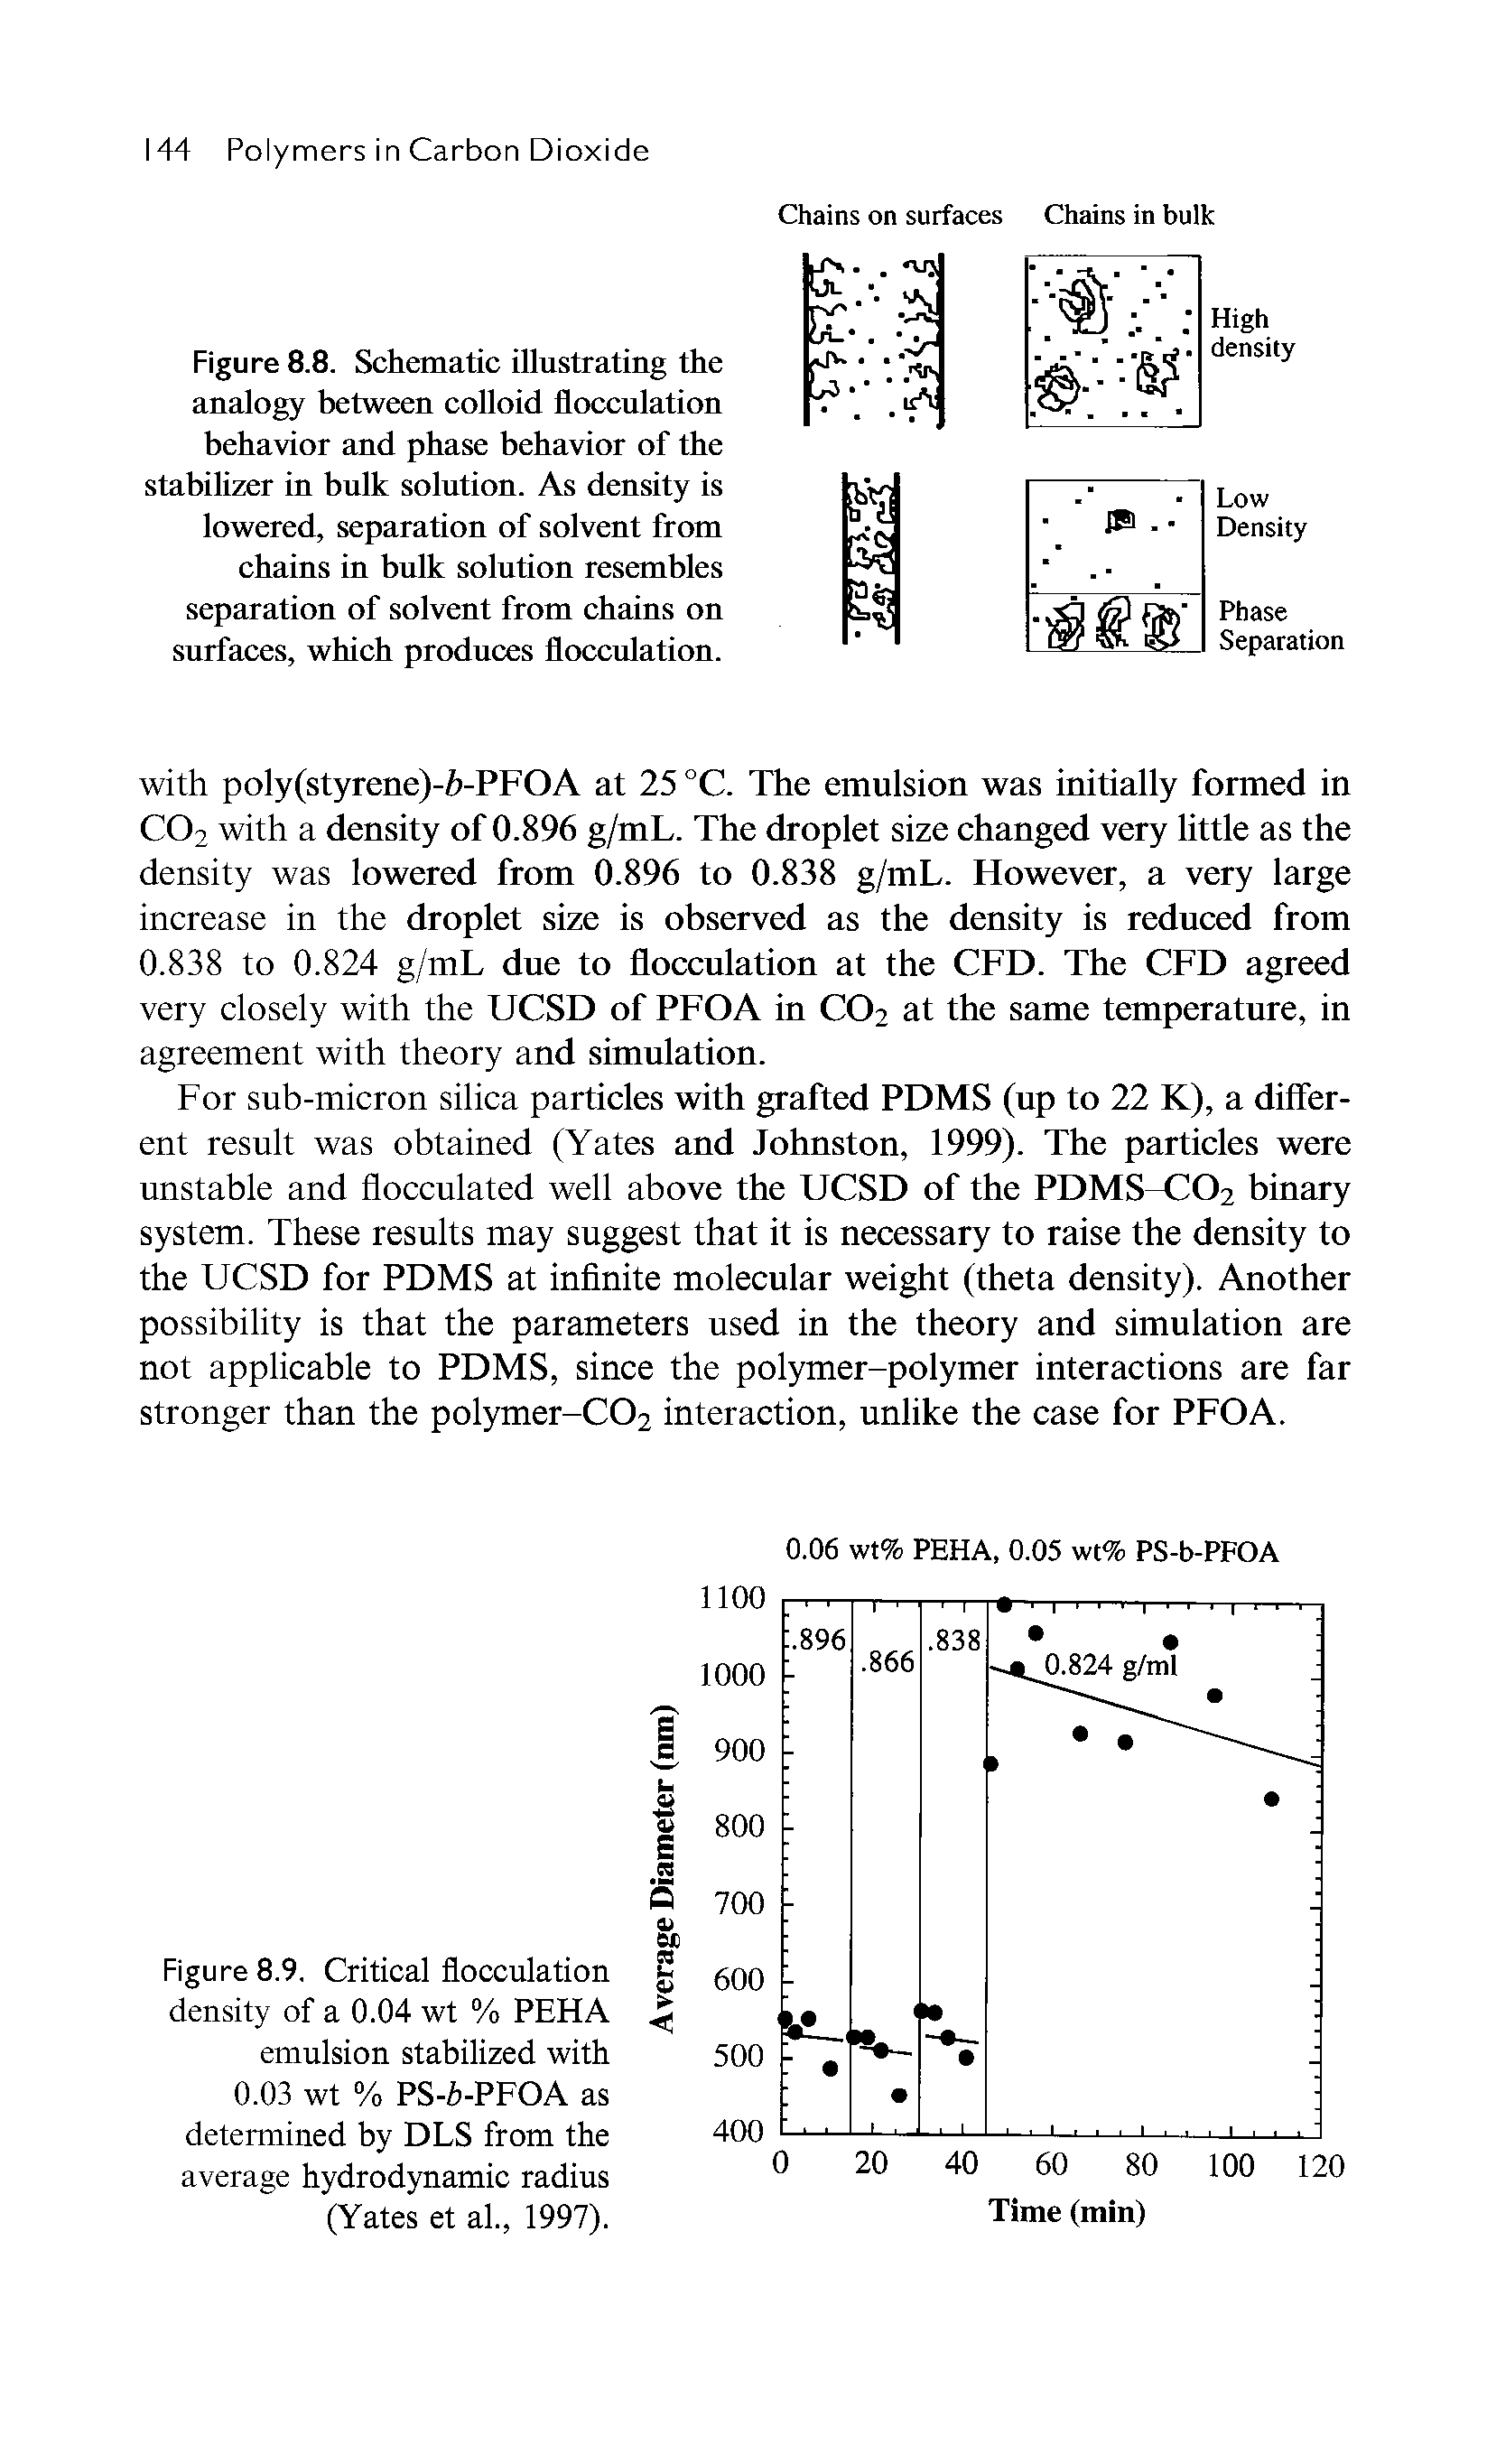 Figure 8.9. Critical flocculation density of a 0.04 wt % PEHA emulsion stabilized with 0.03 wt % PS-6-PFOA as determined by DLS from the average hydrodynamic radius (Yates et al., 1997).